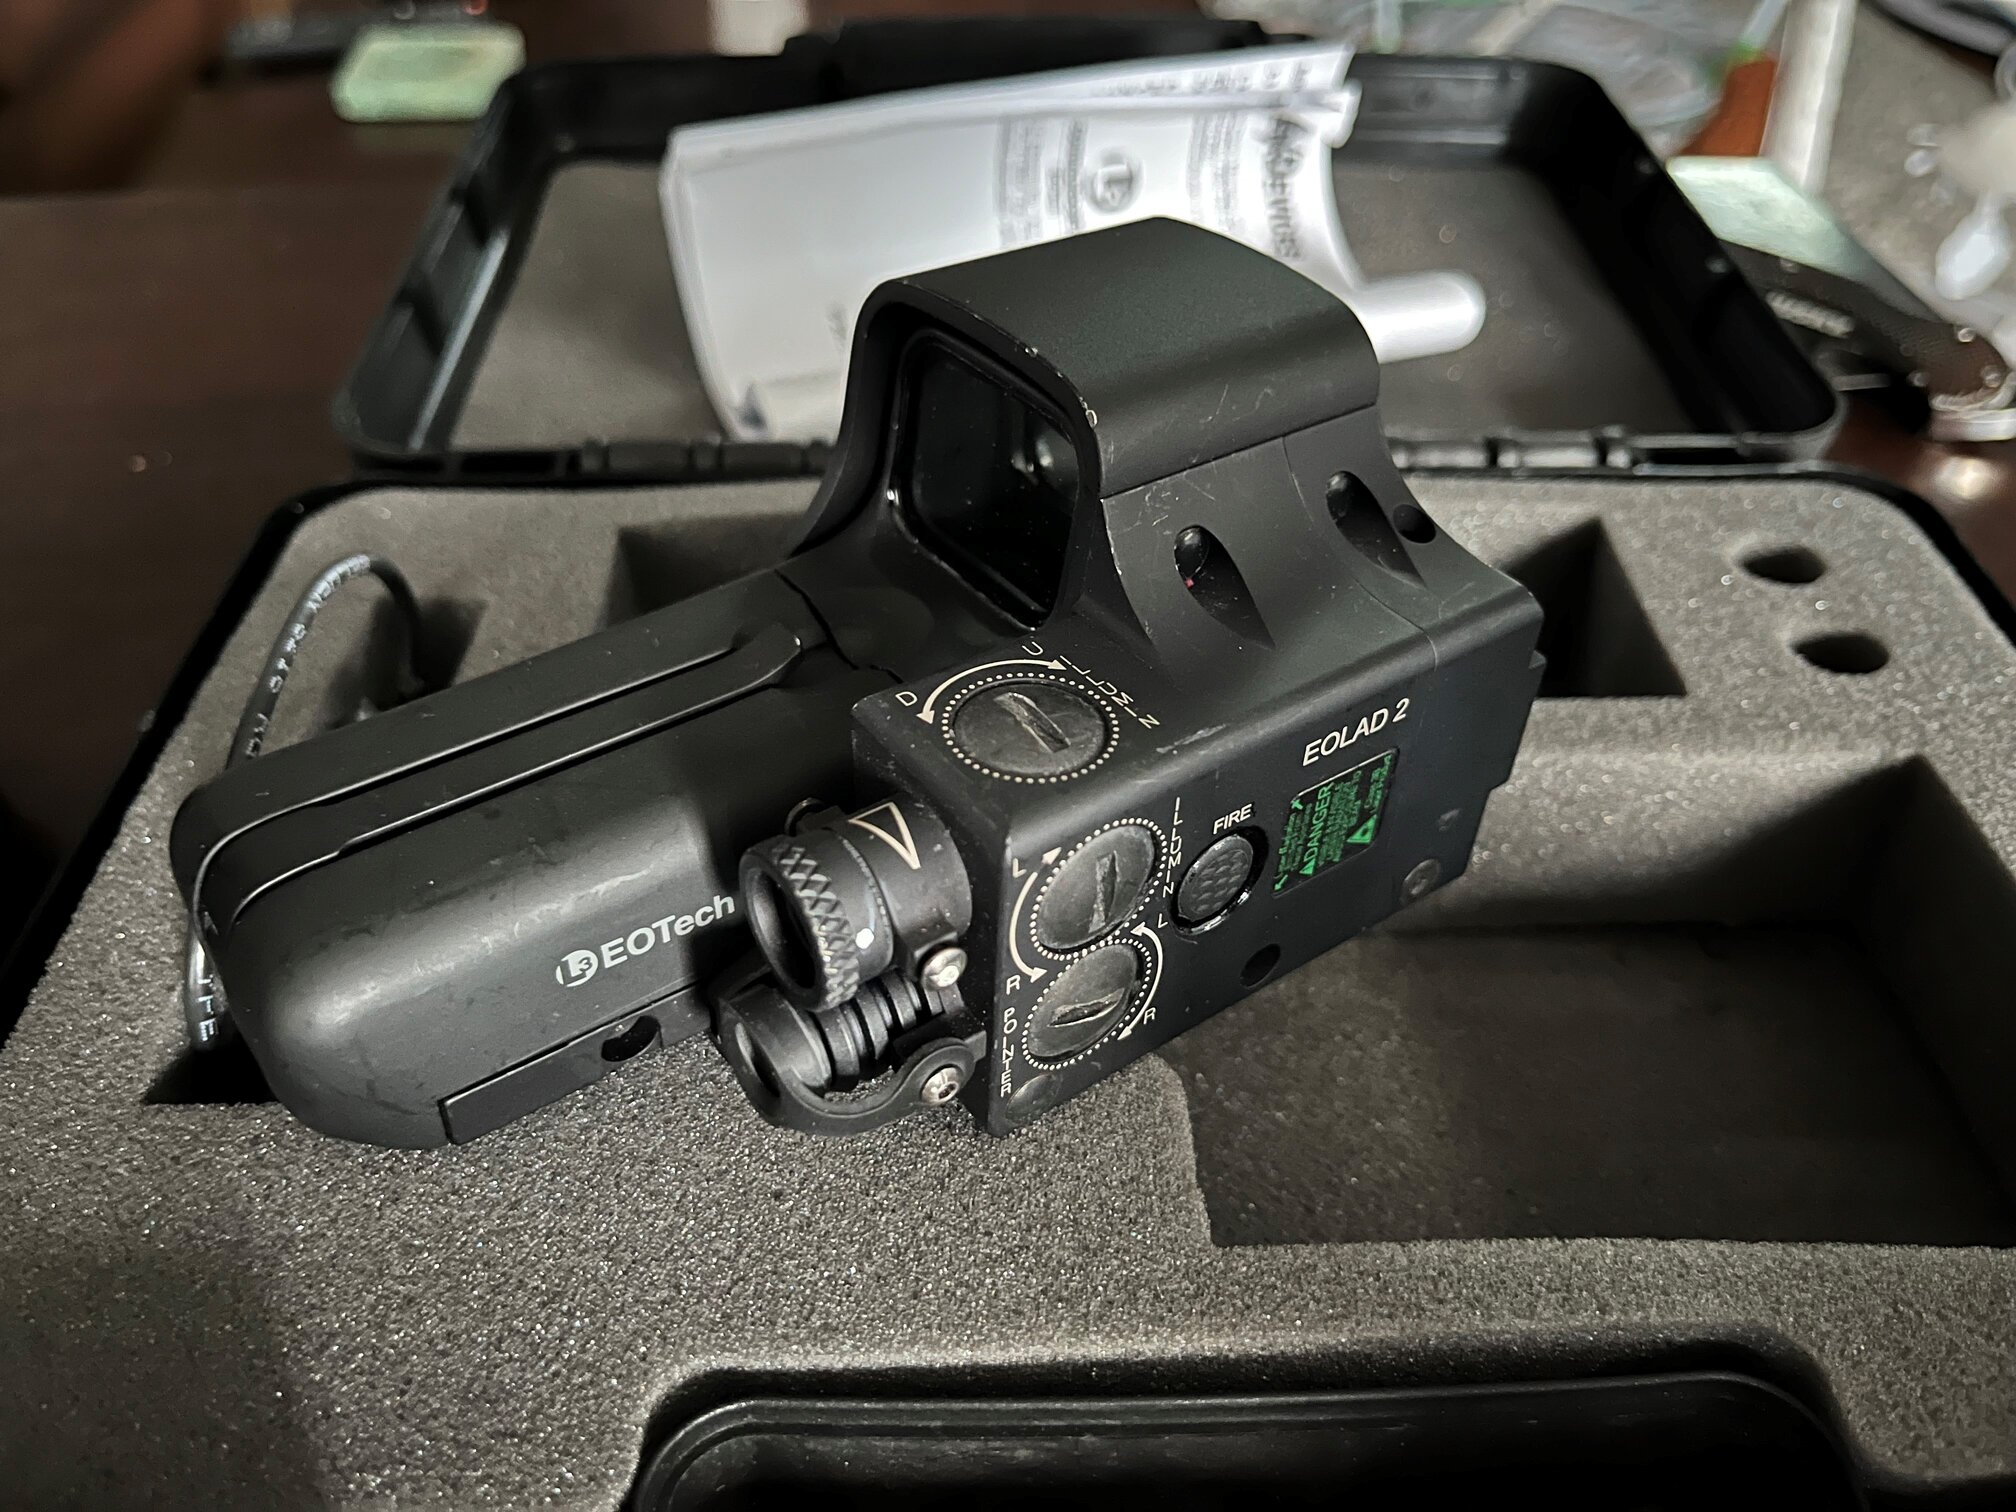 Eotech / Laser Devices Eolad 2 Weapon Holographic Sight